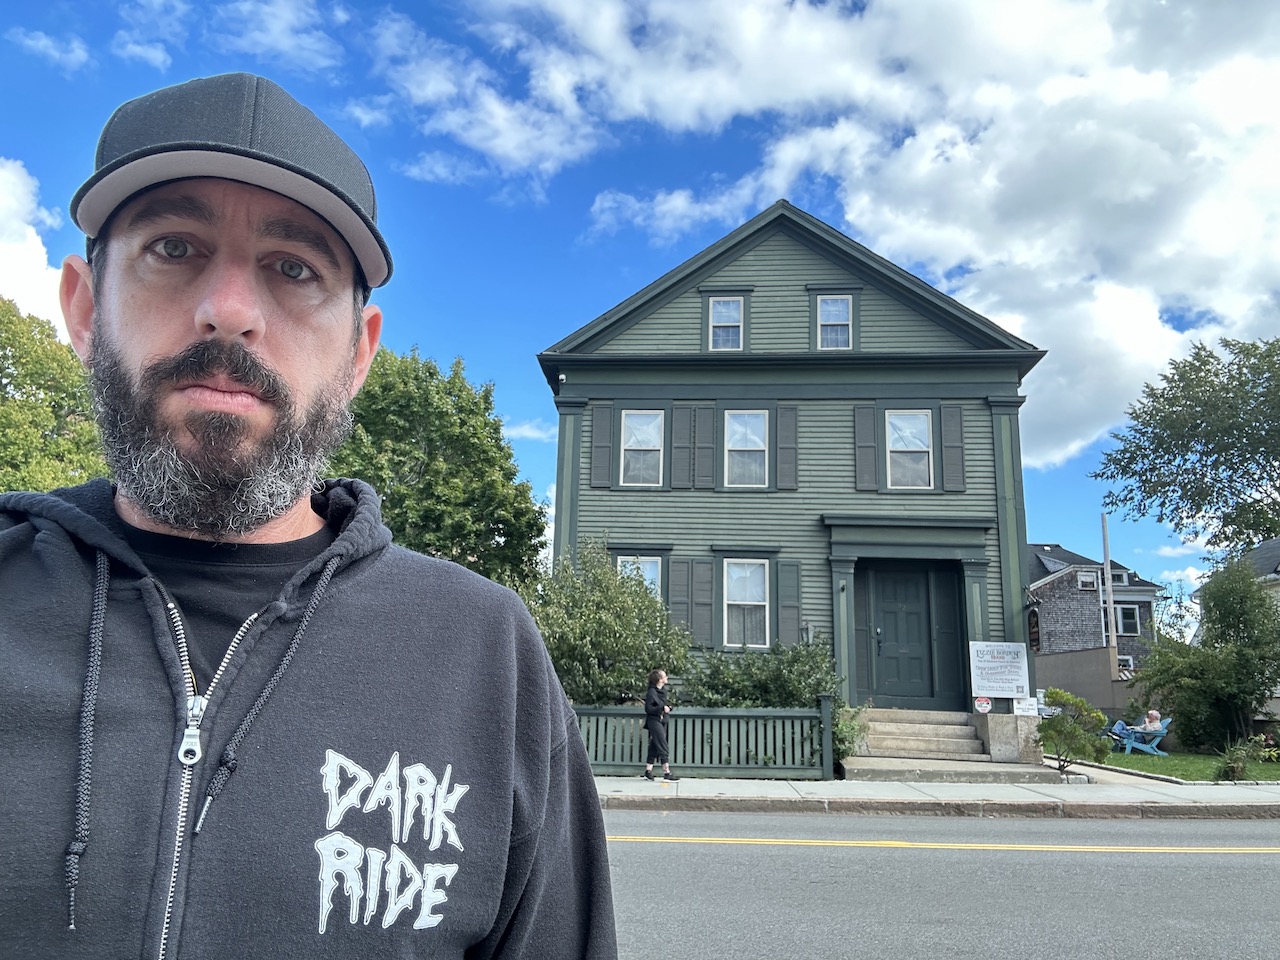 Guest Kevin in front of the Lizzie Borden House